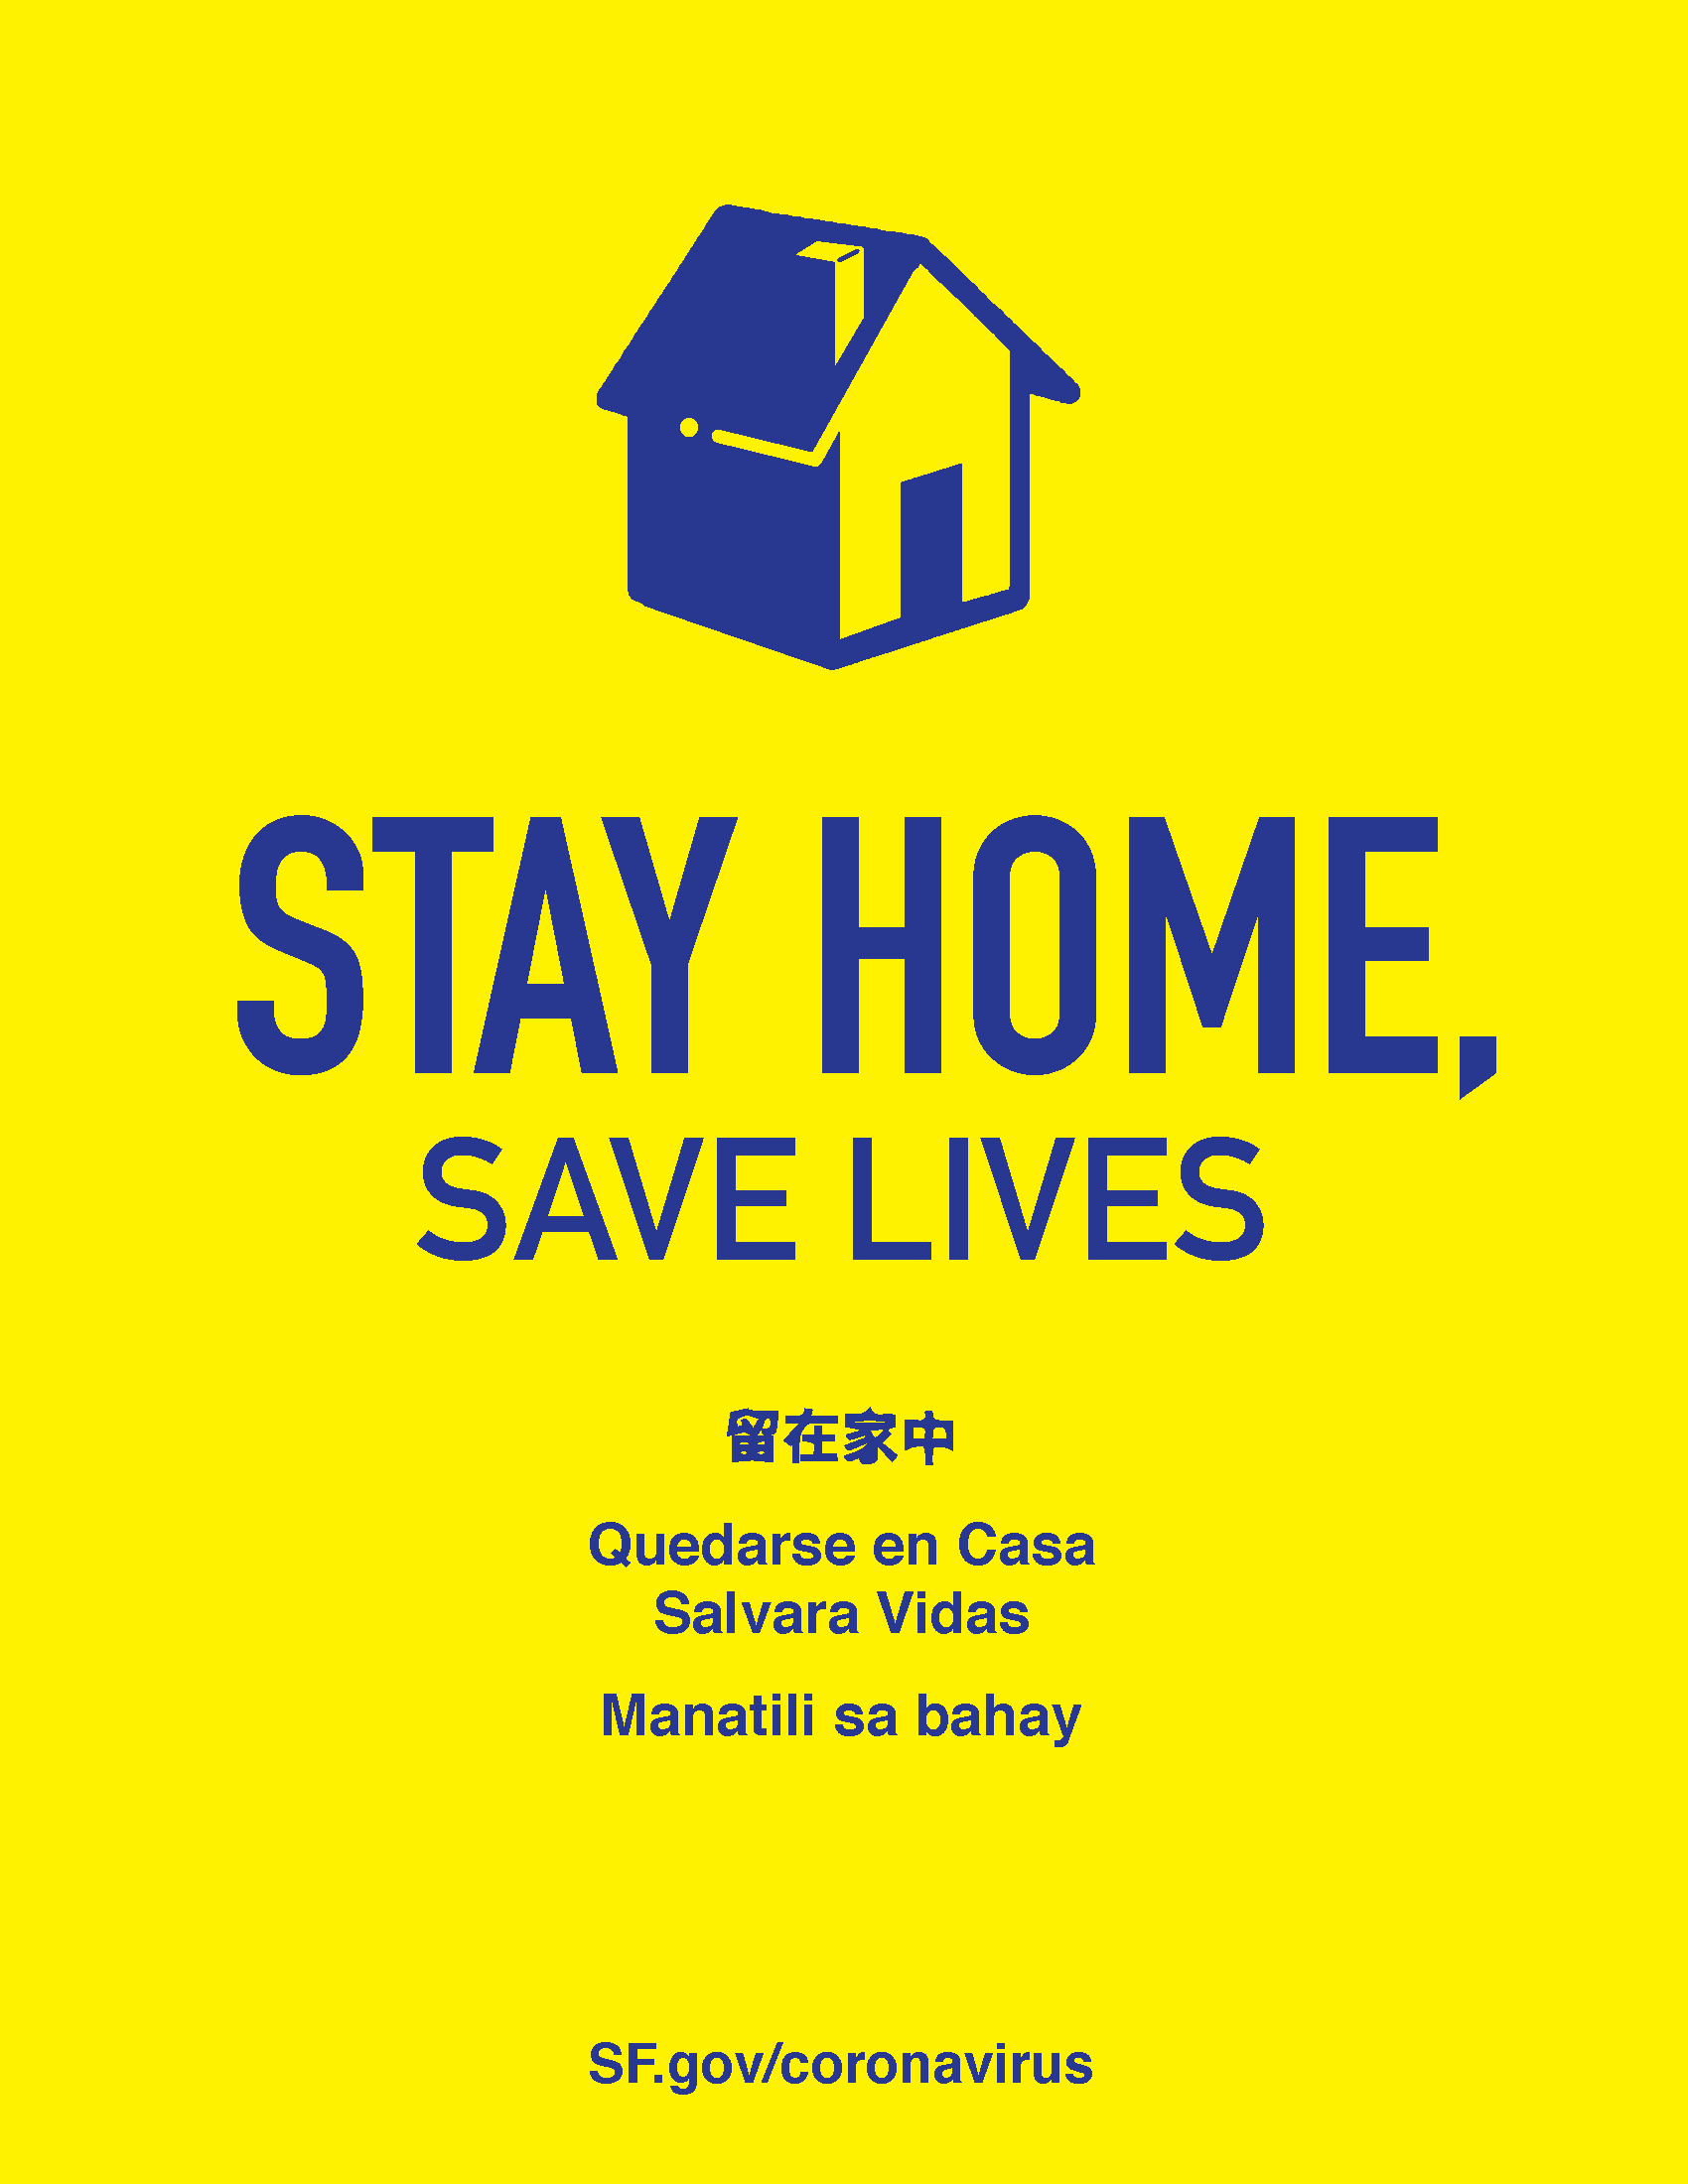 "Stay Home Saves Lives" poster, version 1